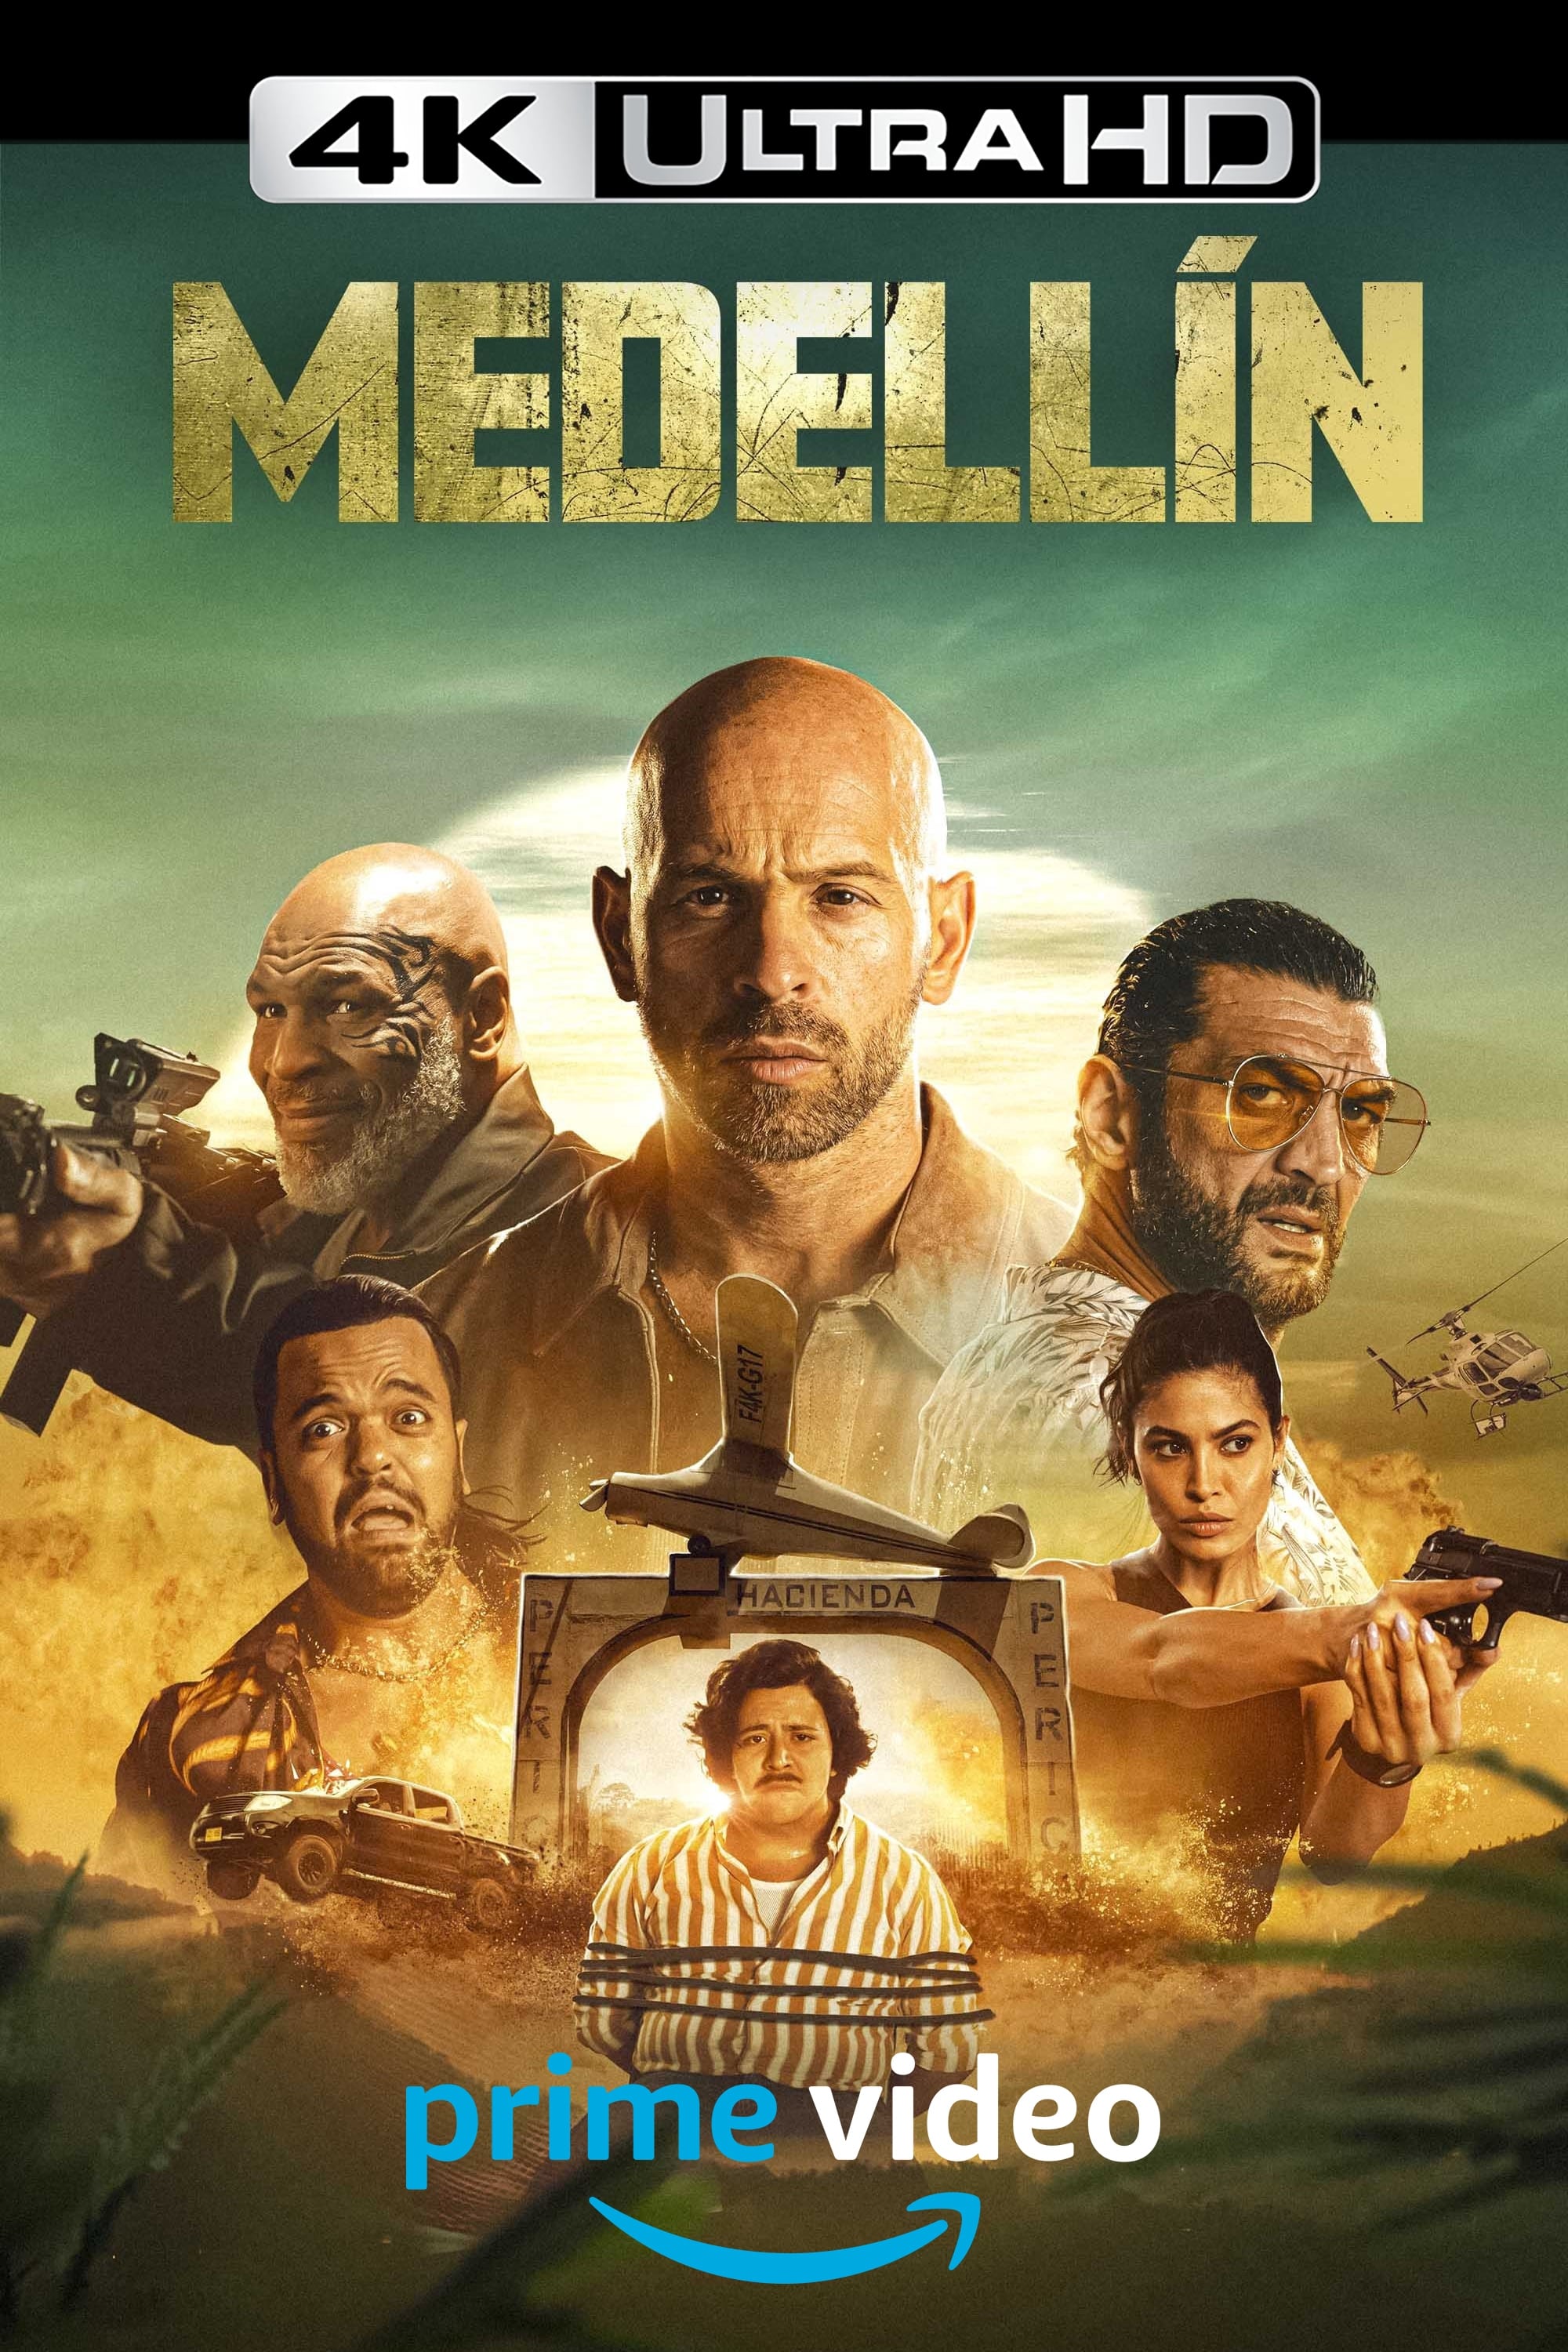 To save his little brother from the hands of dangerous narcos of the Medellín cartel, Reda has a plan that is as simple as it is totally insane: put together a team and raid Colombia. But this adventure is going to get completely out of control when he decides to kidnap the son of the cartel leader to exchange him for his brother's life.